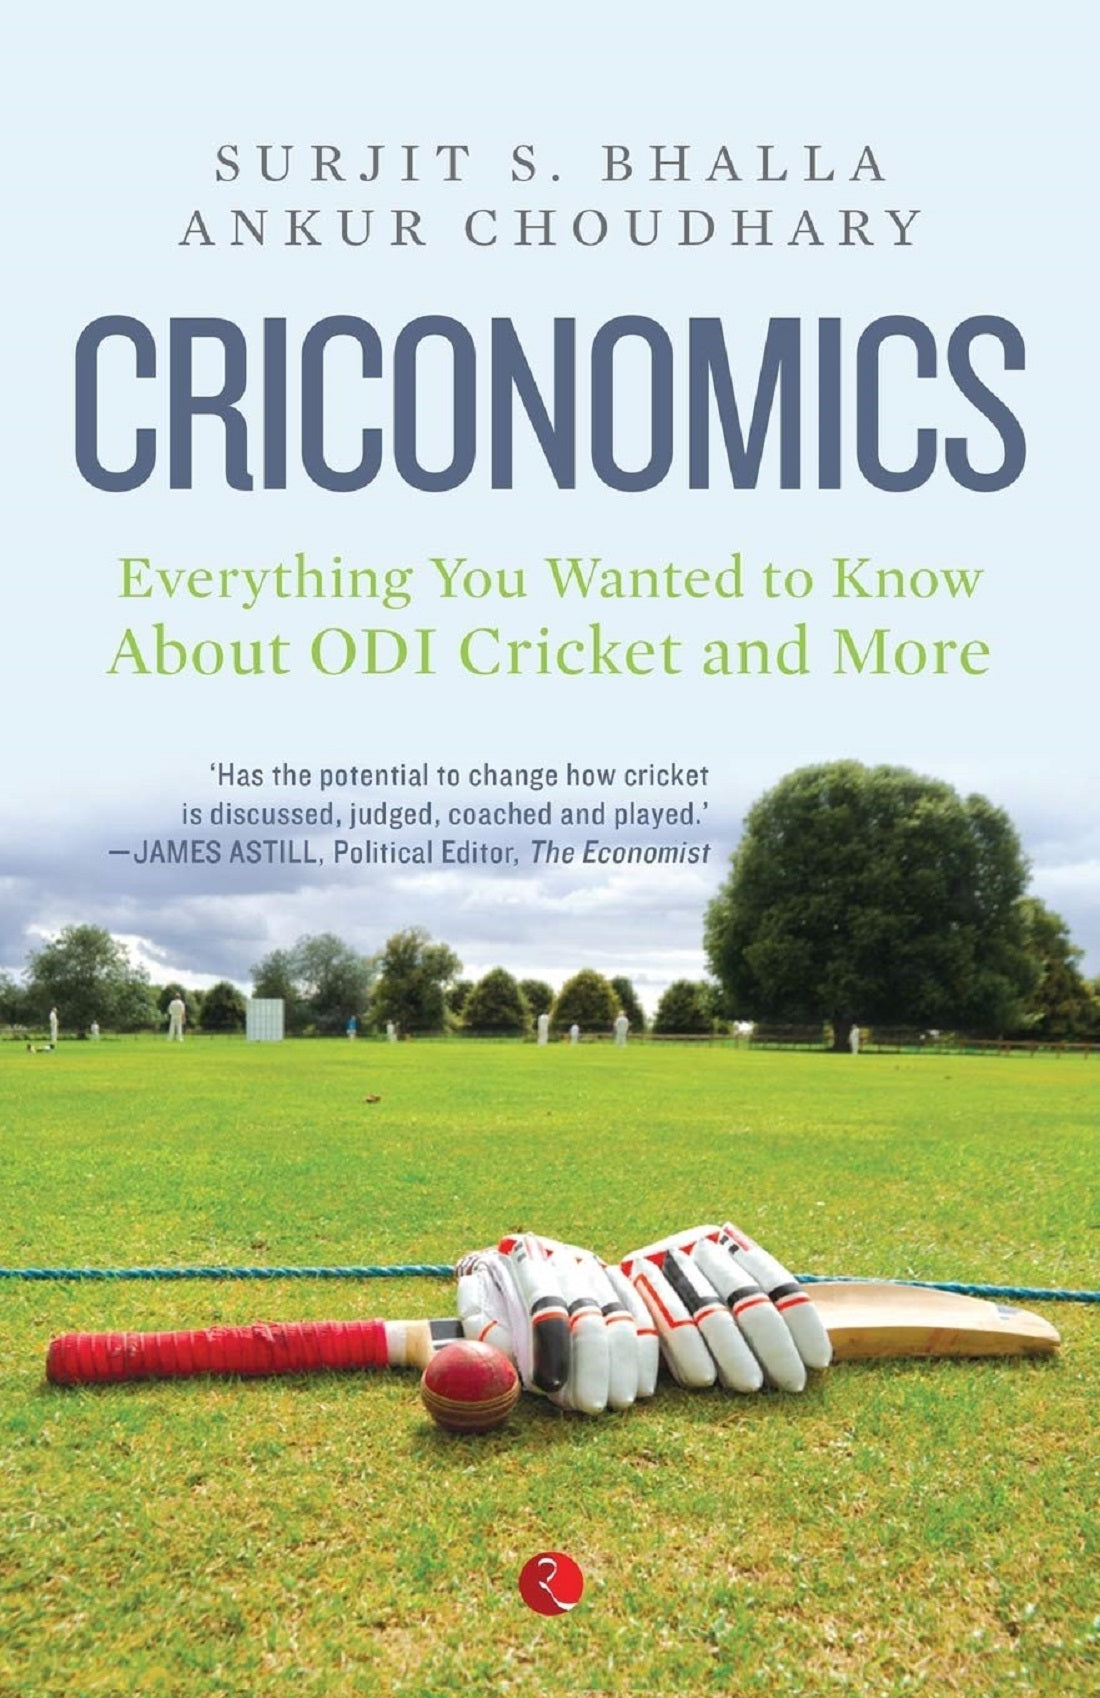 CRICONOMICS EVERYTHING YOU WANTED TO KNOW ABOUT ODI CRICKET AND MORE